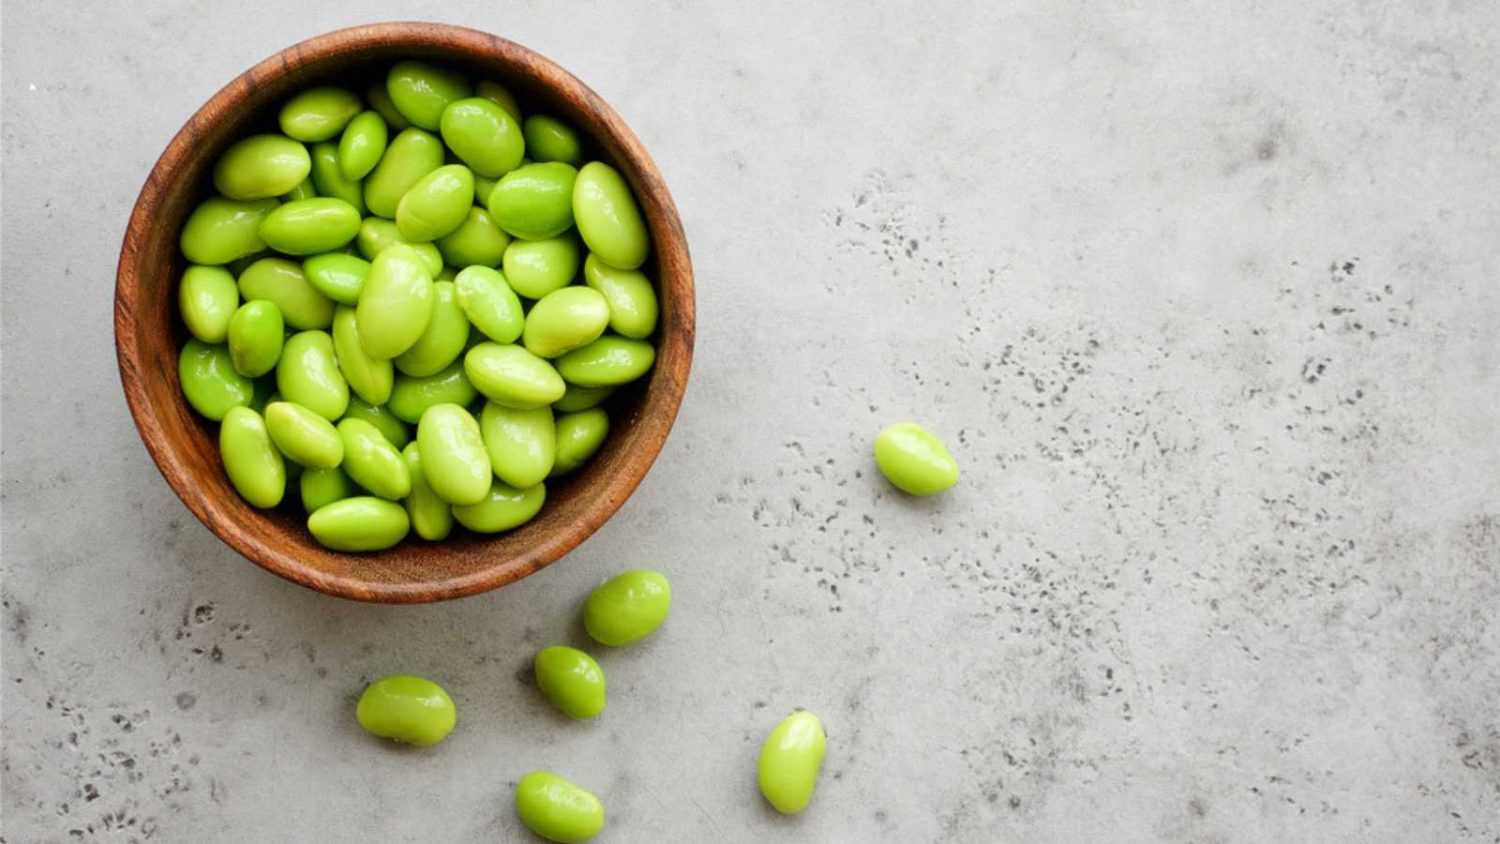 Edamame beans in bowl on light background. Close up view